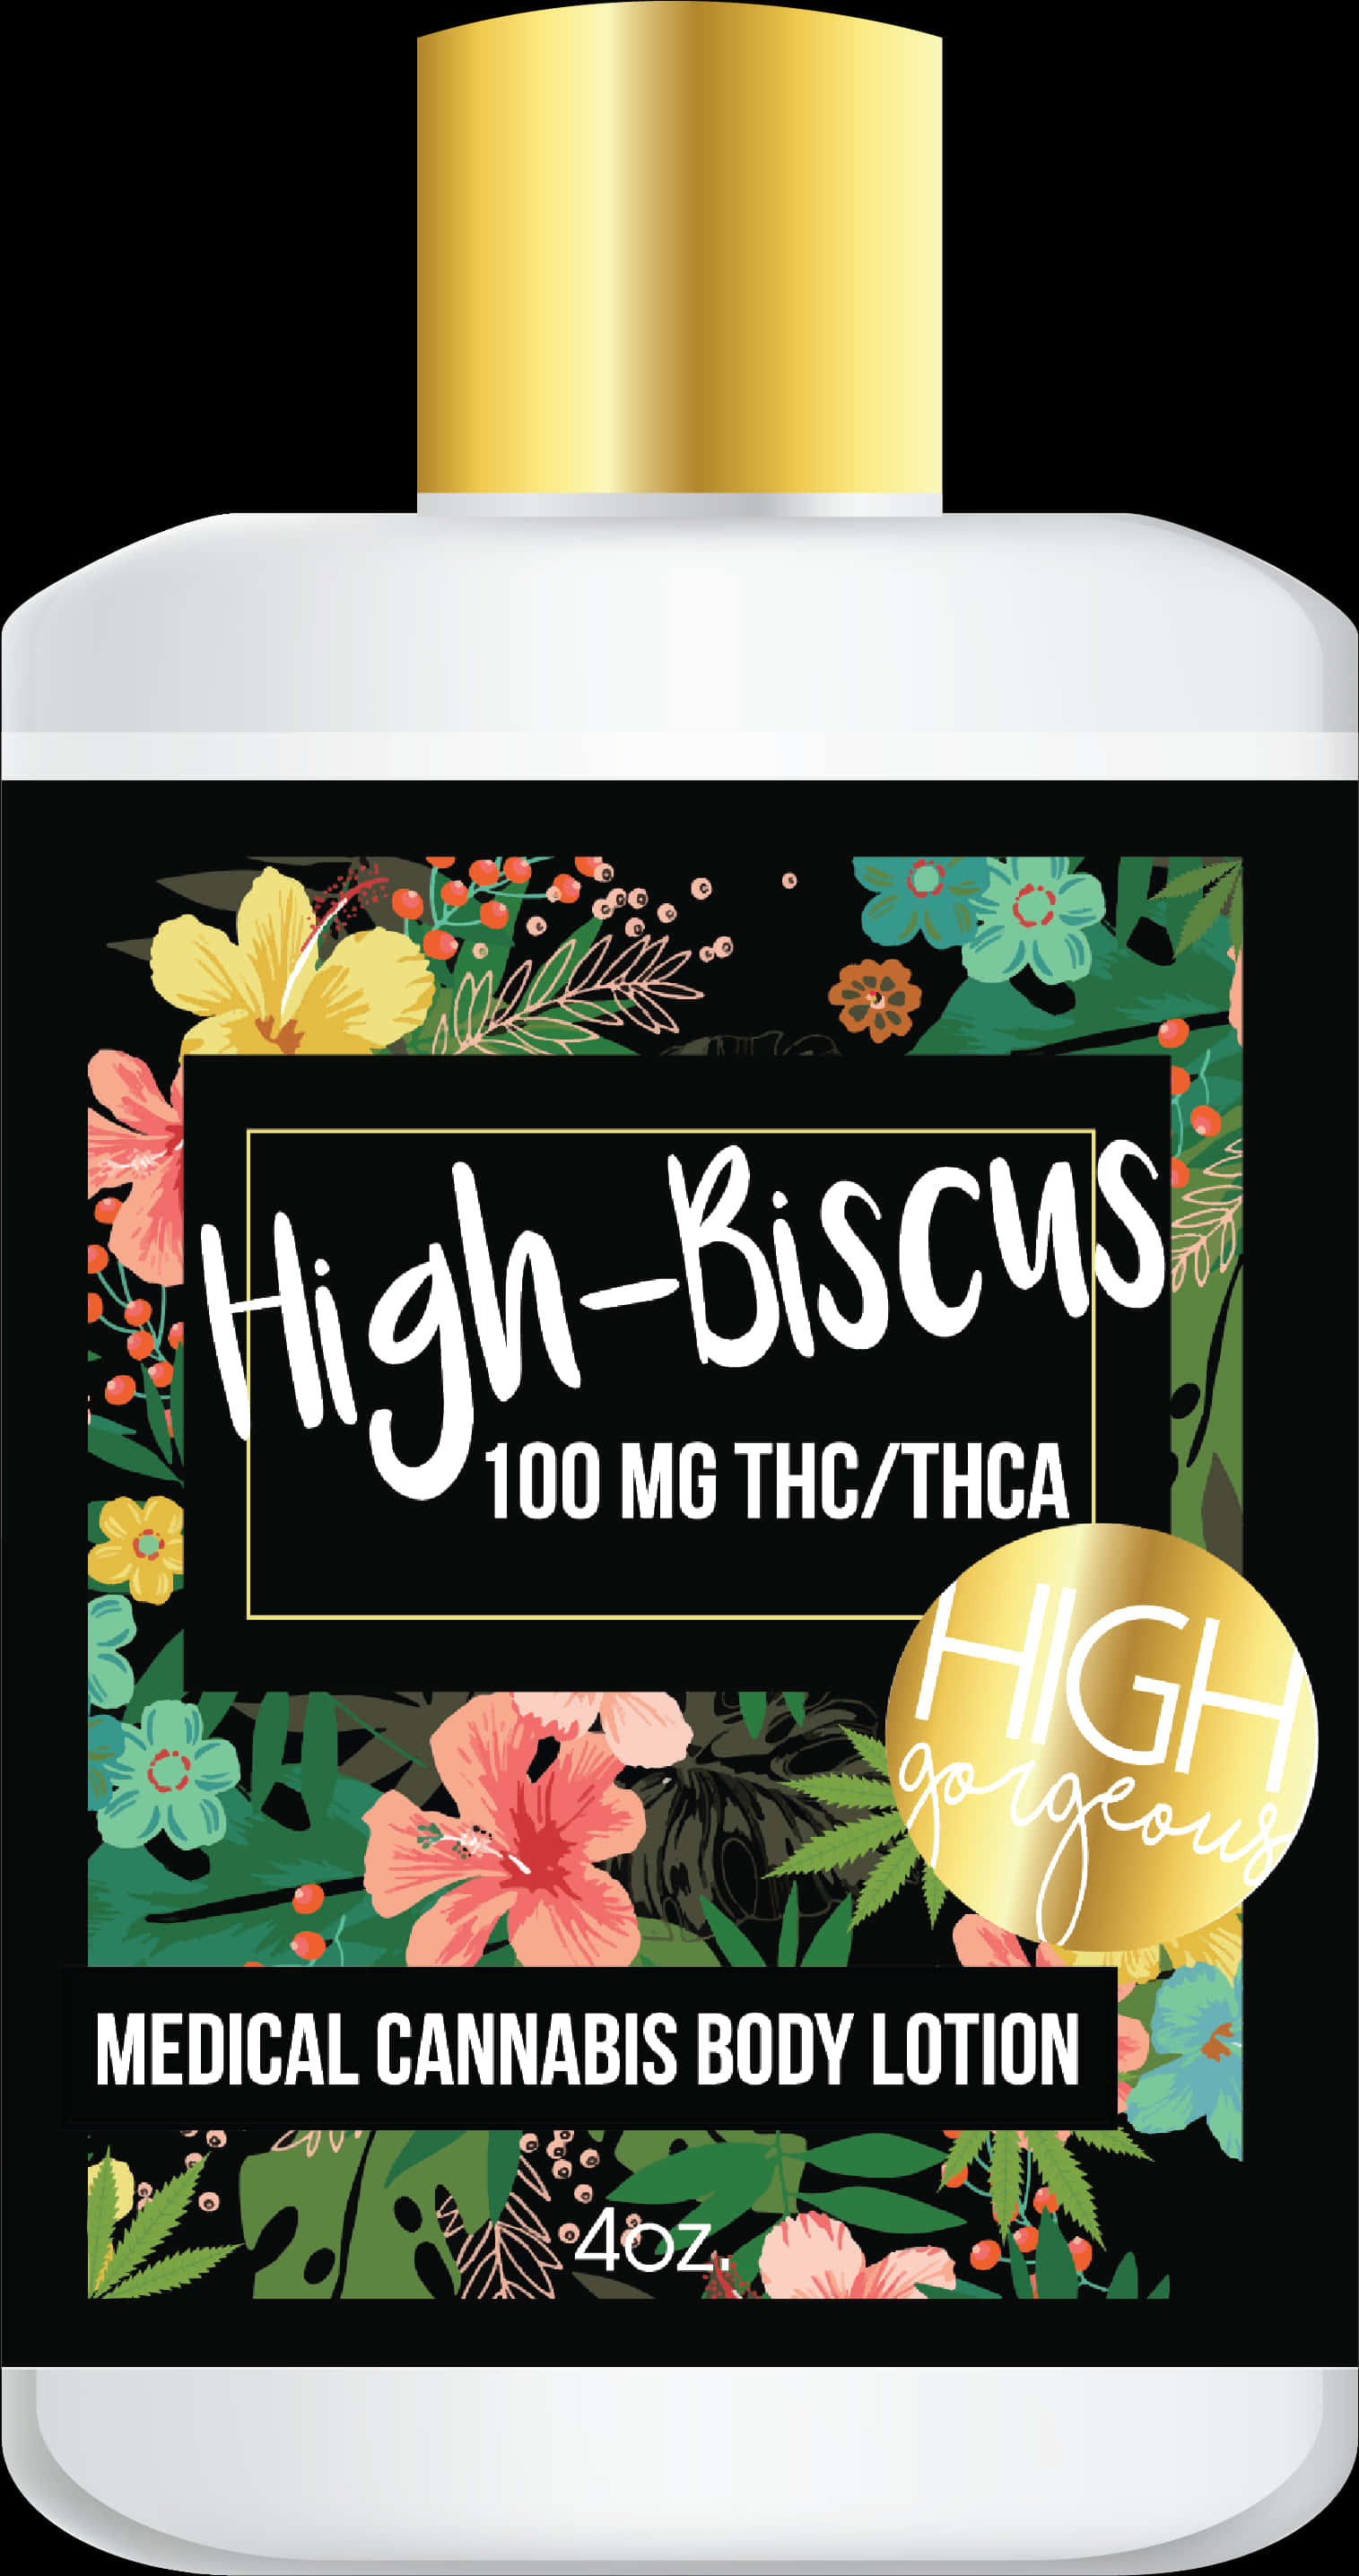 High Biscus Cannabis Body Lotion Product PNG